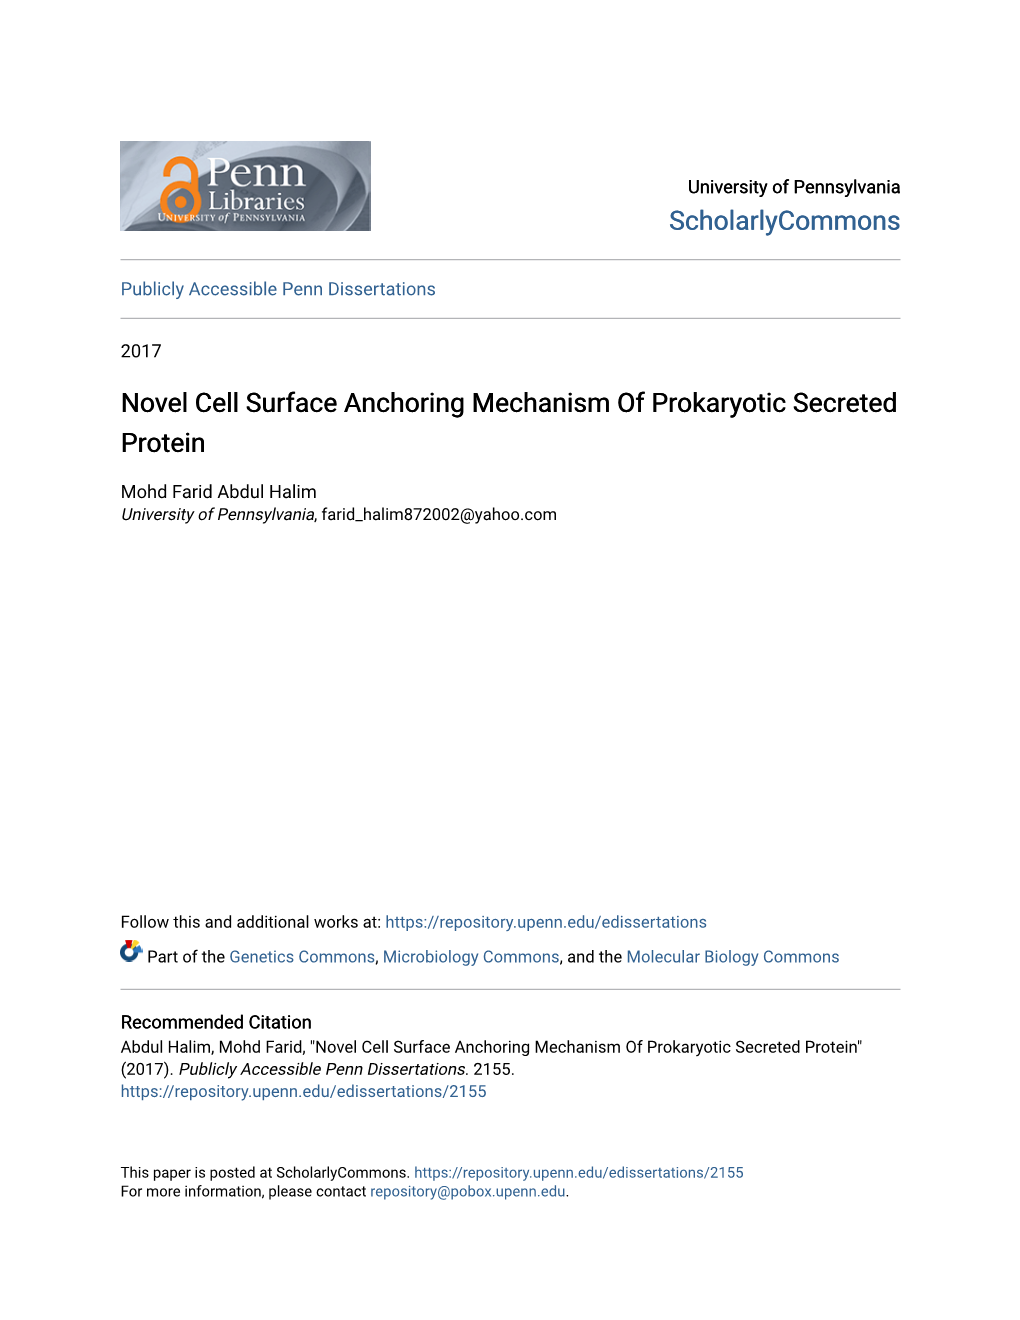 Novel Cell Surface Anchoring Mechanism of Prokaryotic Secreted Protein